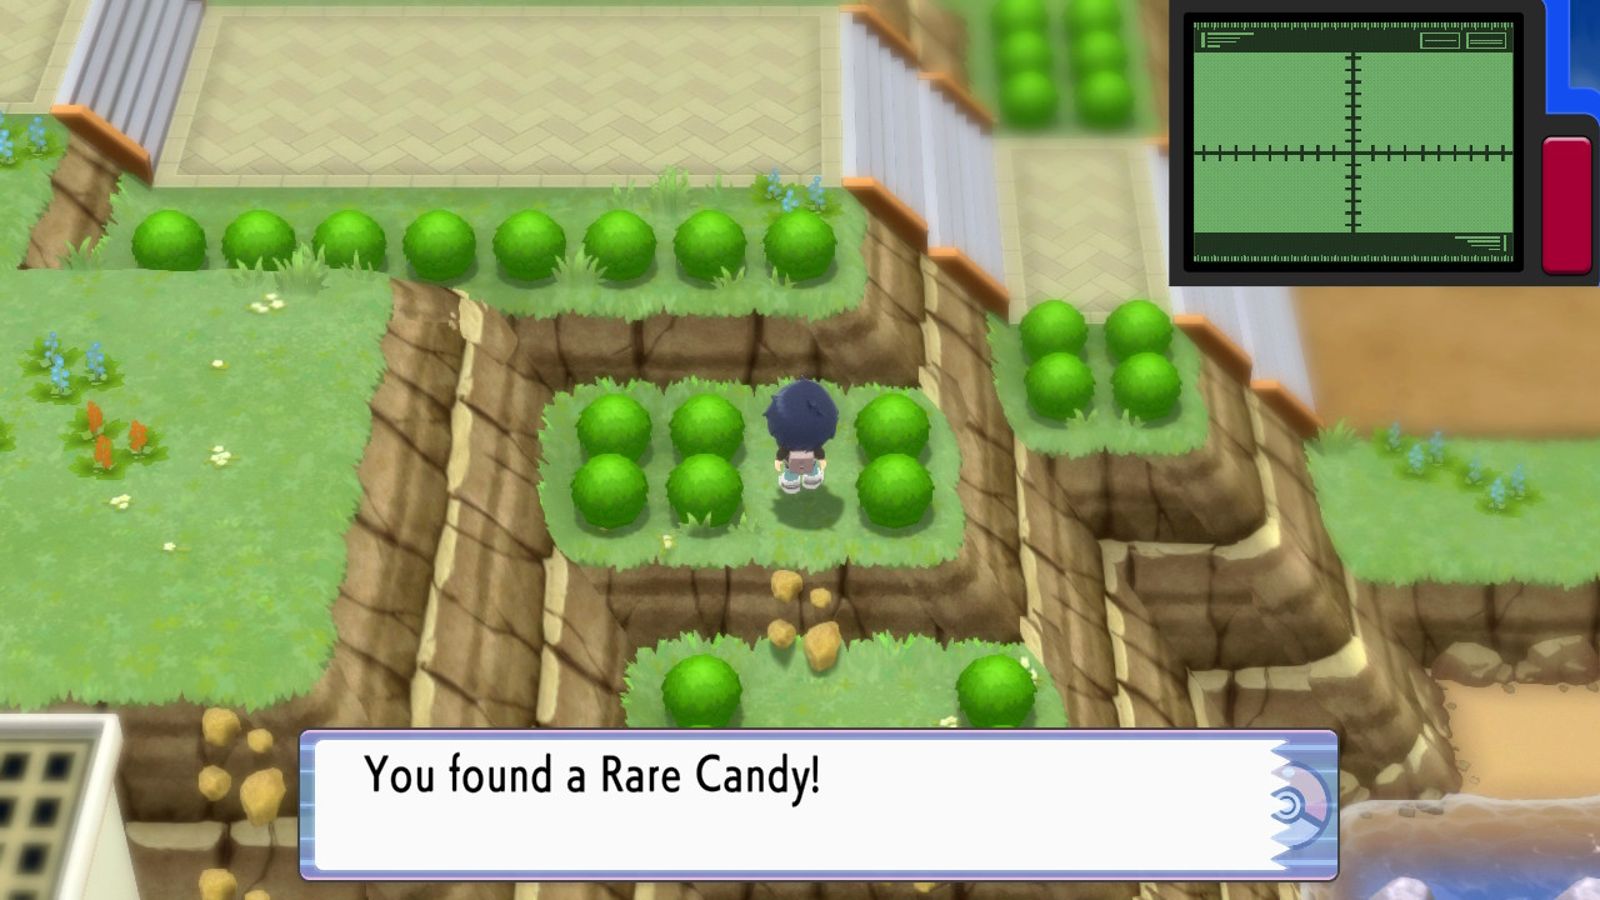 Players can find Rare Candy in Pokemon Brilliant Diamond and Shining Pearl's Sinnoh region.